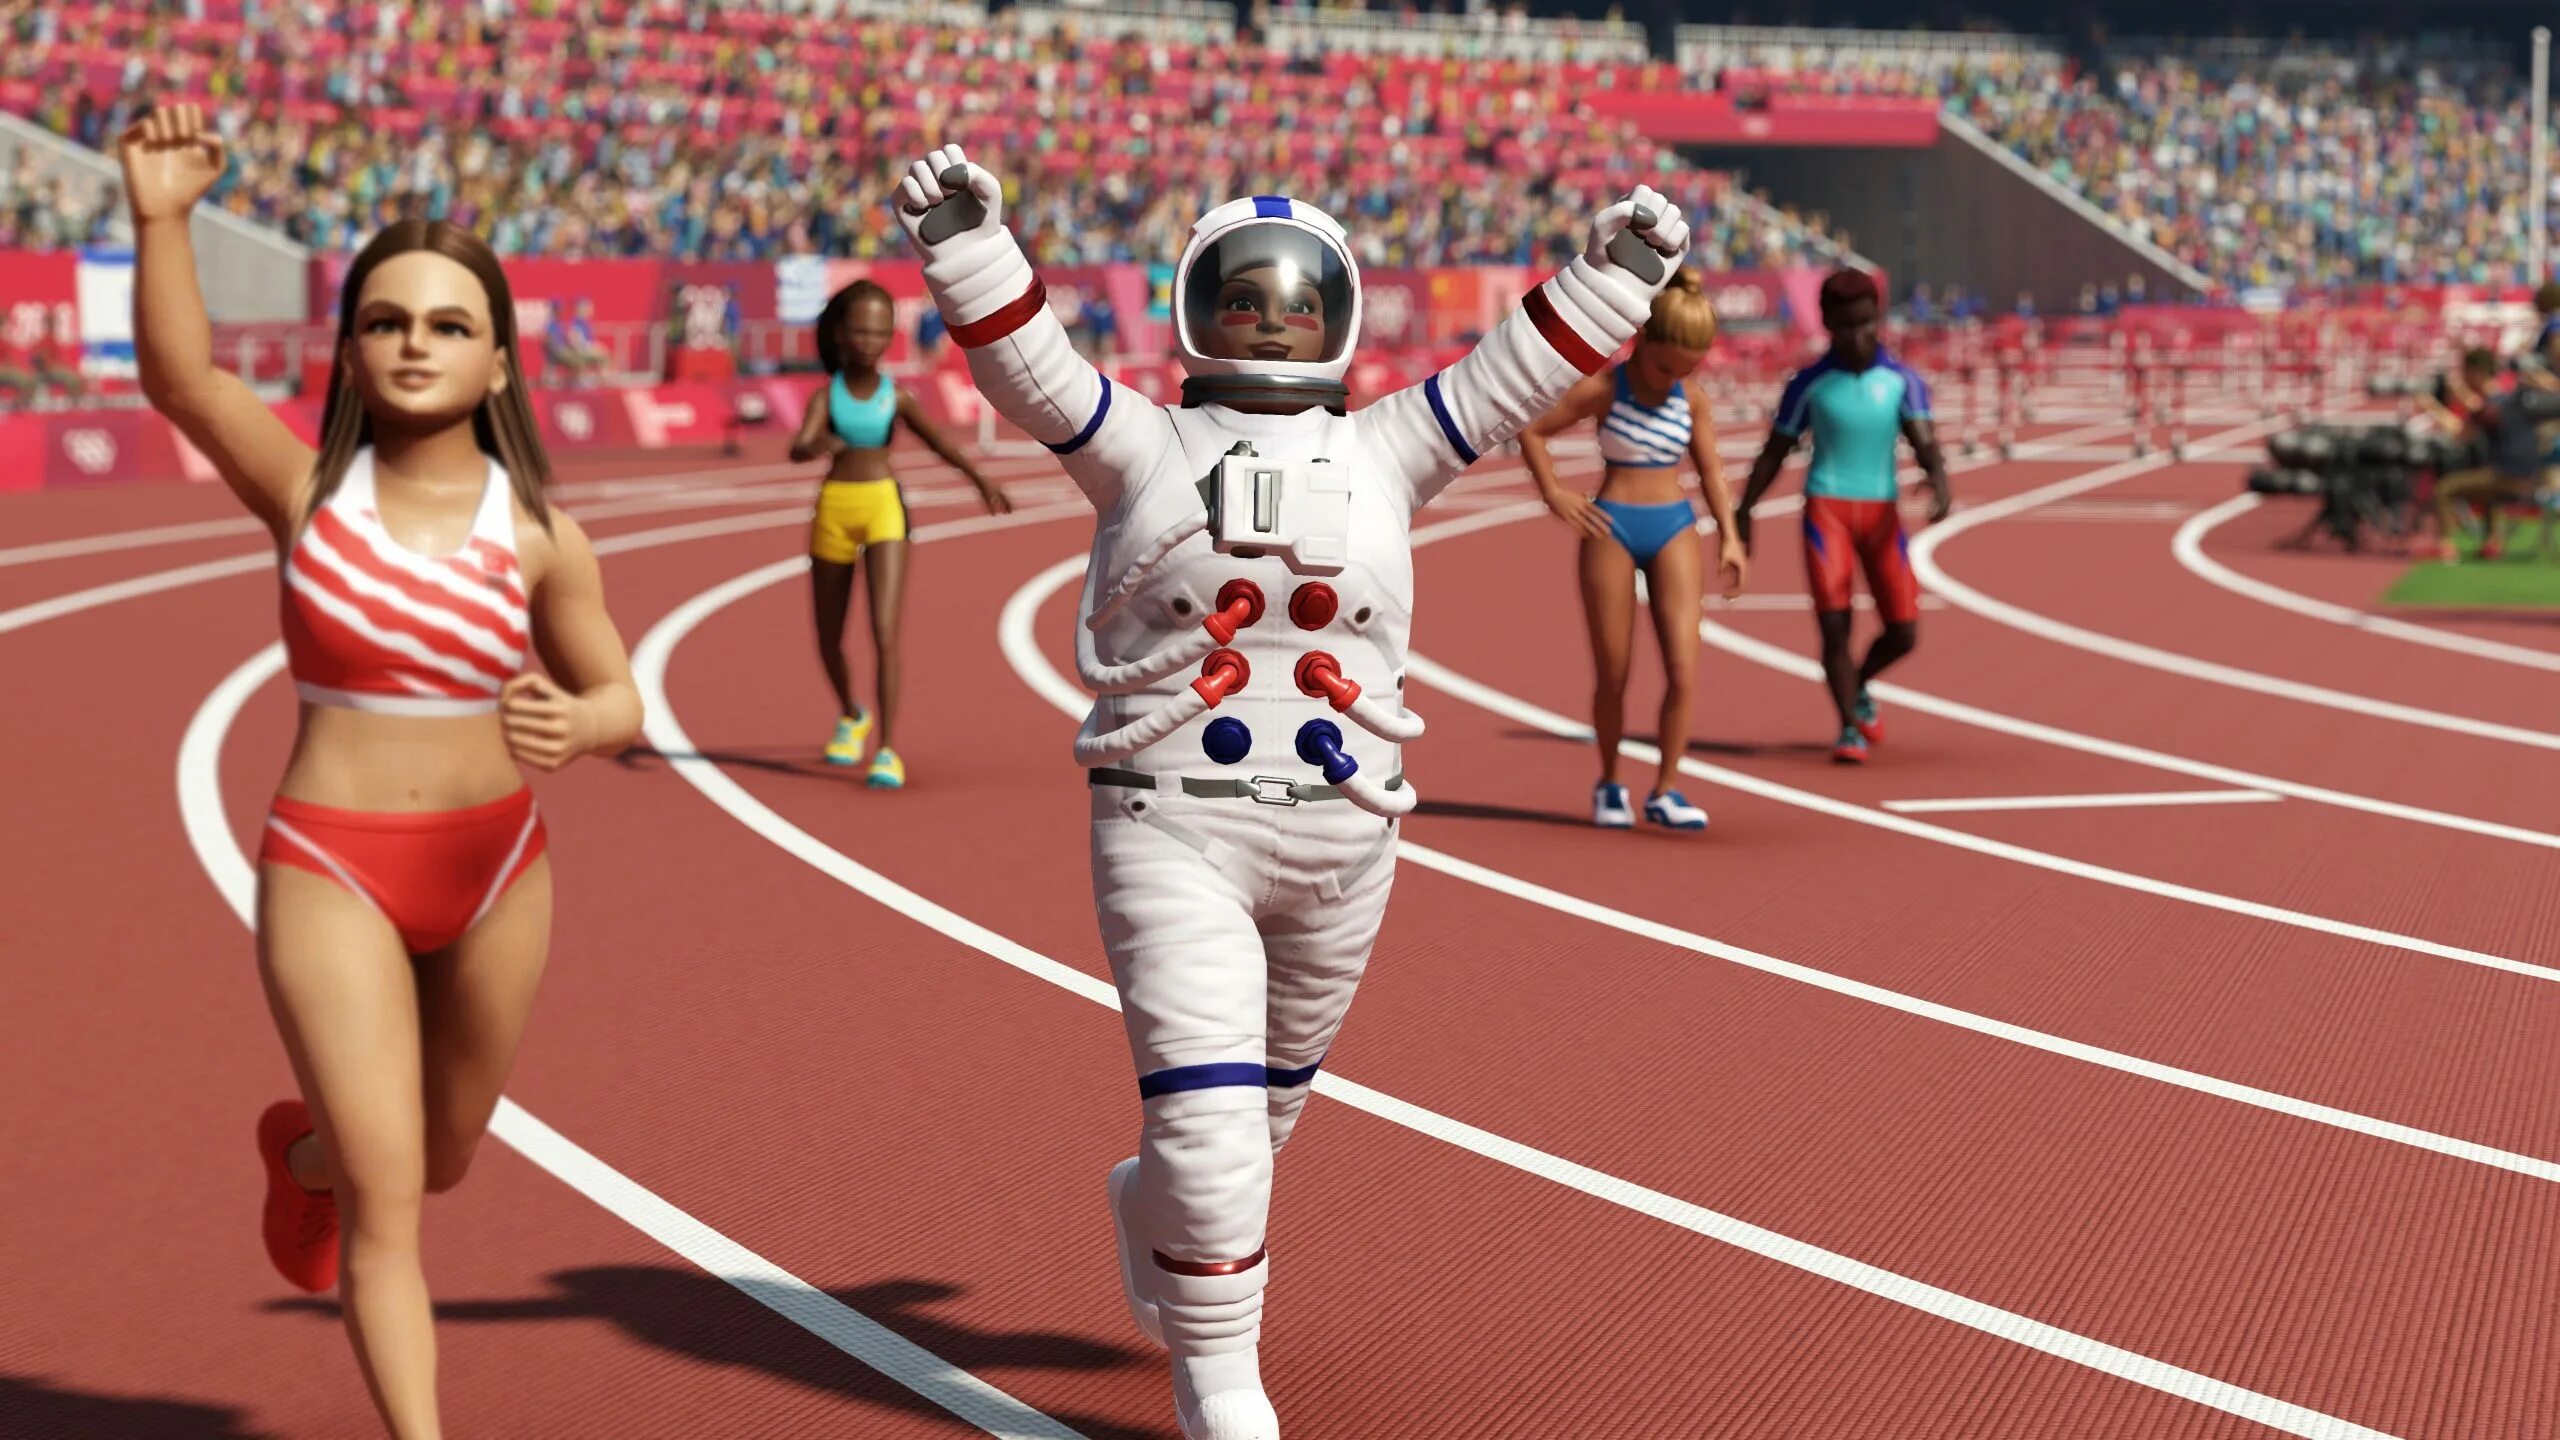 Tokyo 2020 game. Olympic Tokyo 2020 игра. Olympic games Tokyo 2020 - the Official Video game. Игра Олимпик геймс Токио 2020. Токио 2020 игра ps4.